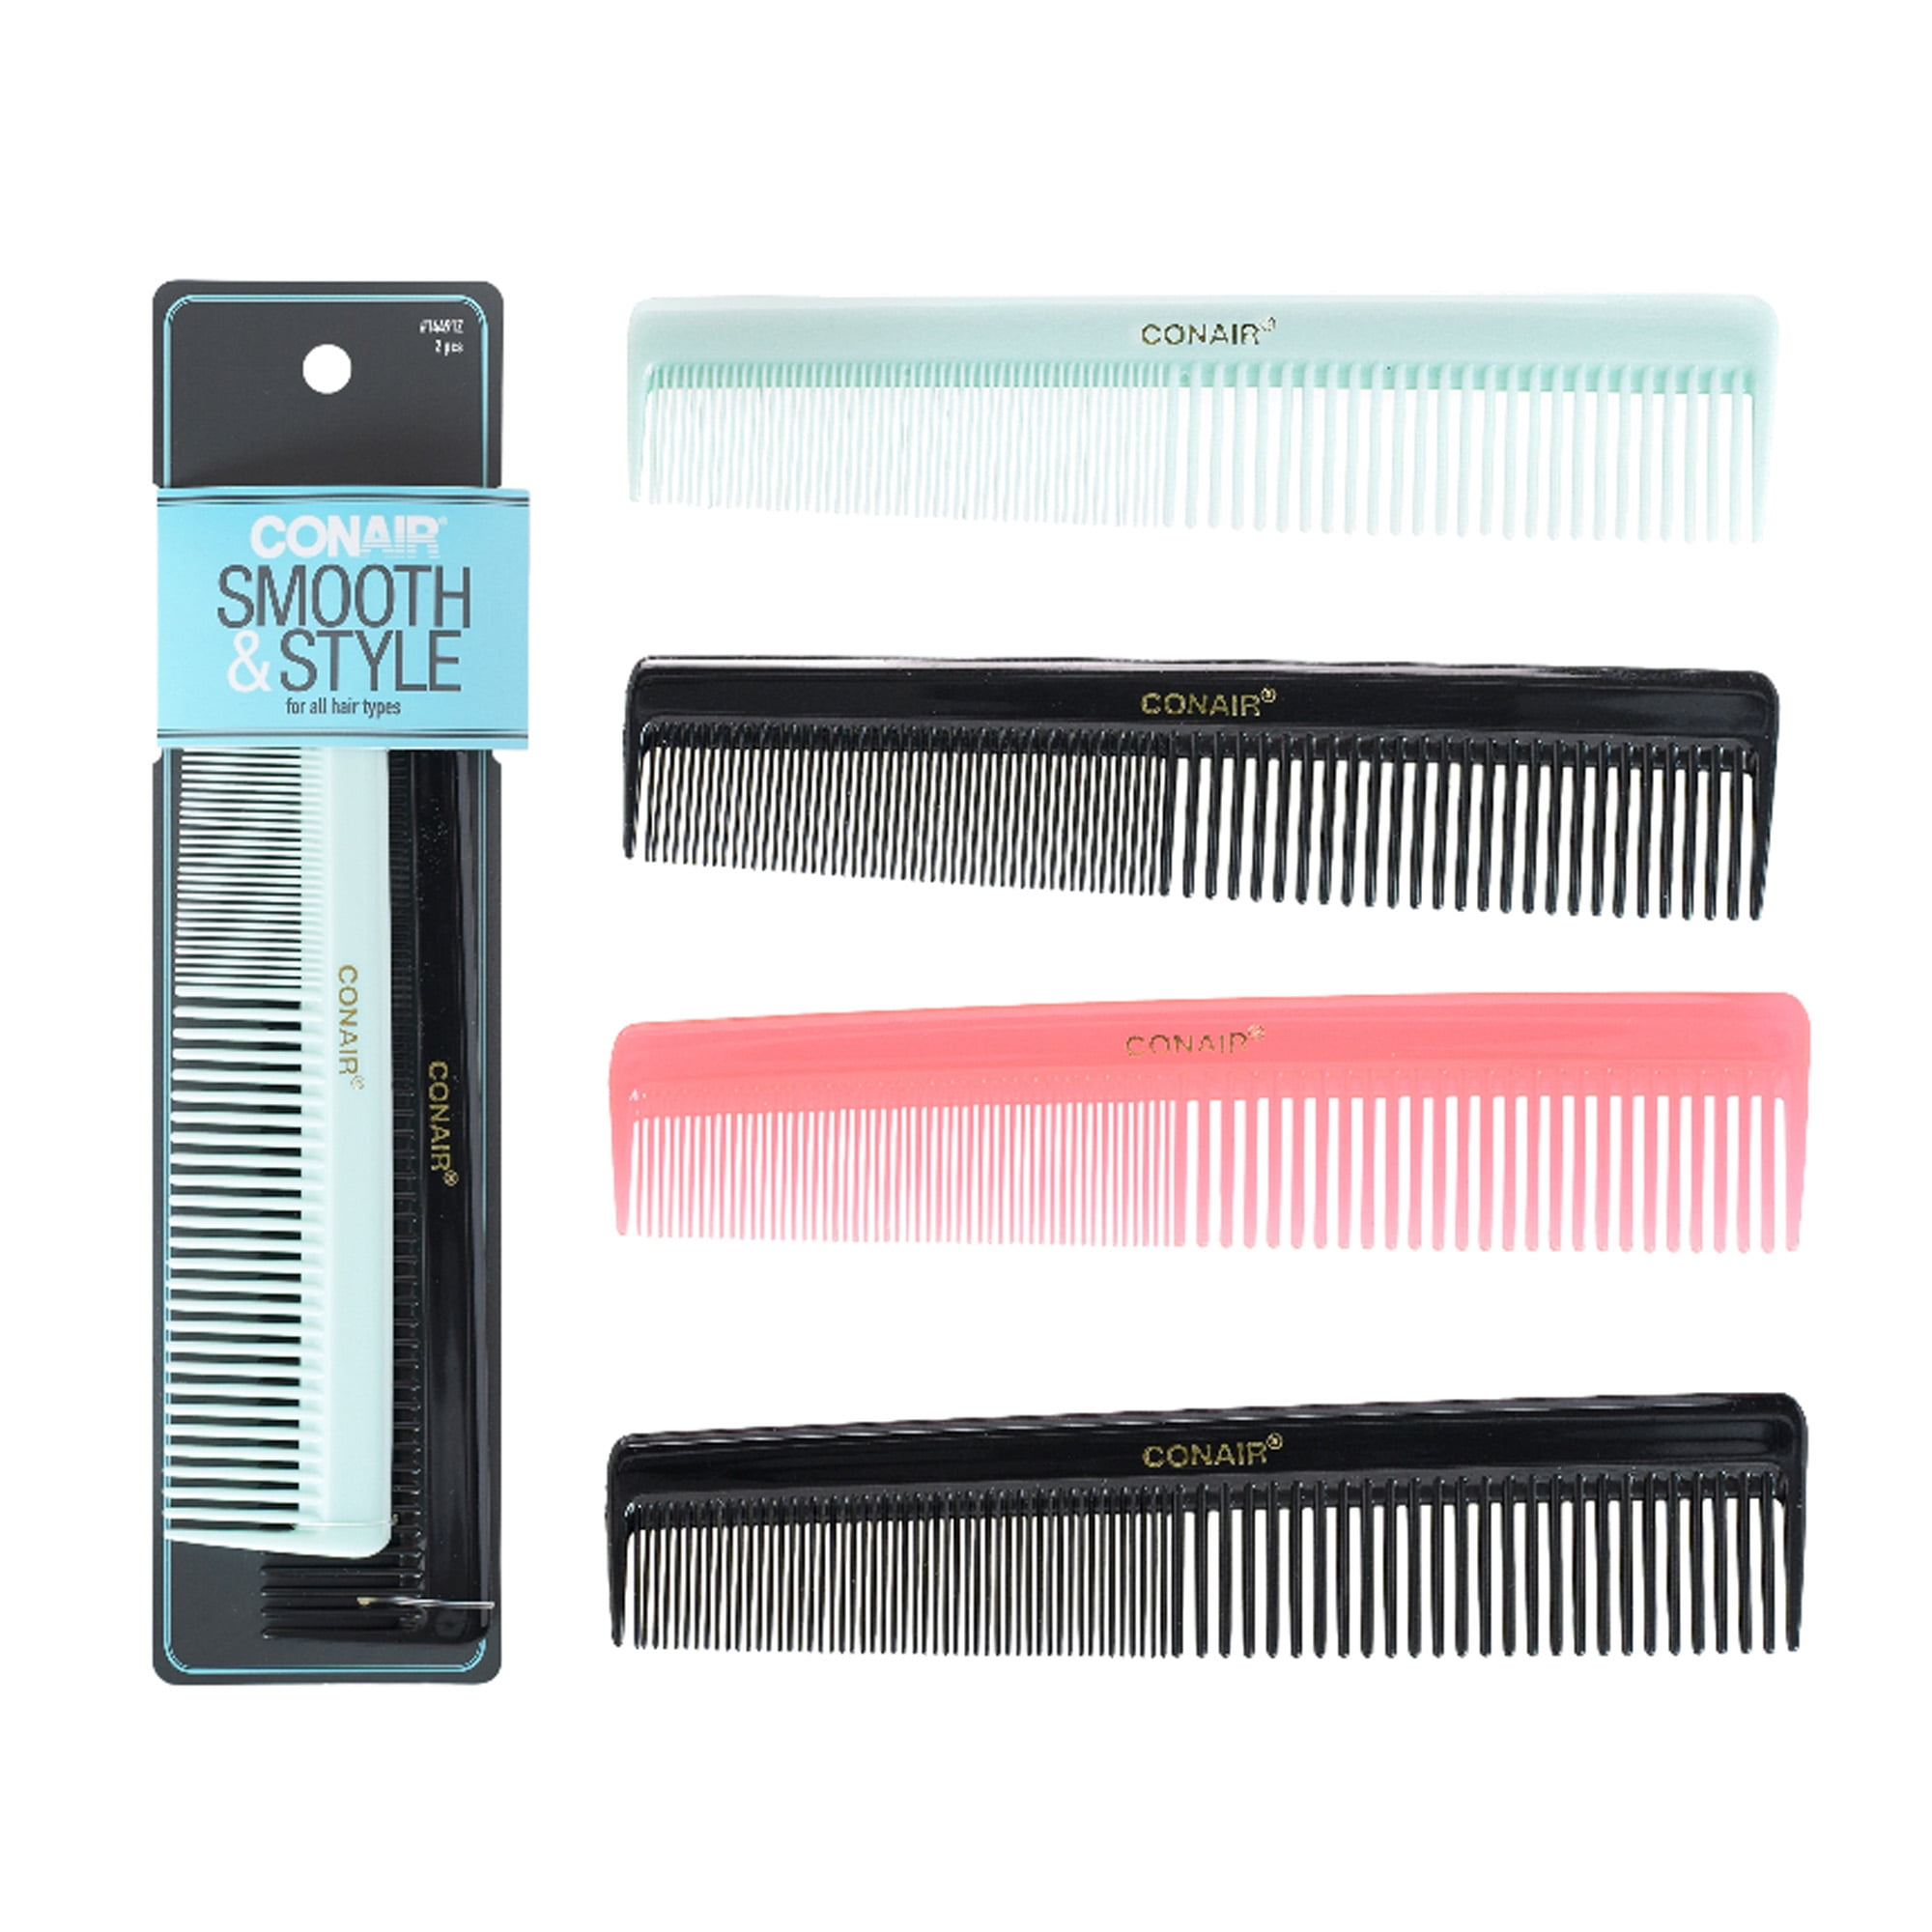 Conair Strong Sustainable Classic Combs for Everyday Use on All Hair Types in Black/Mint or Black/Coral (Colors Vary), 2ct